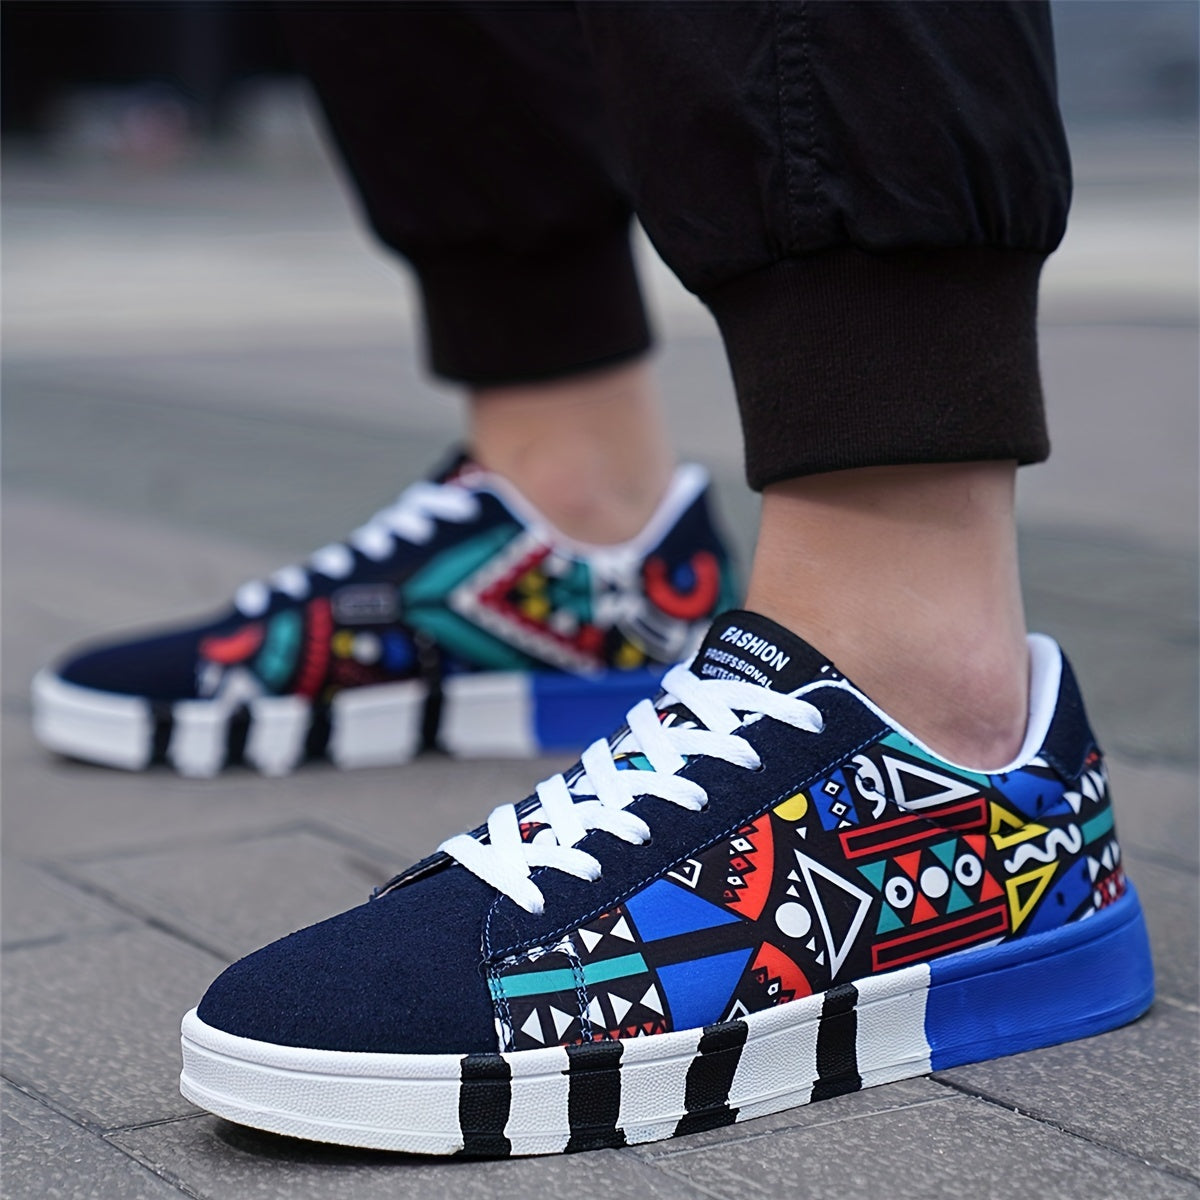 Men's Trendy Skate Shoes, Casual Style Sneakers